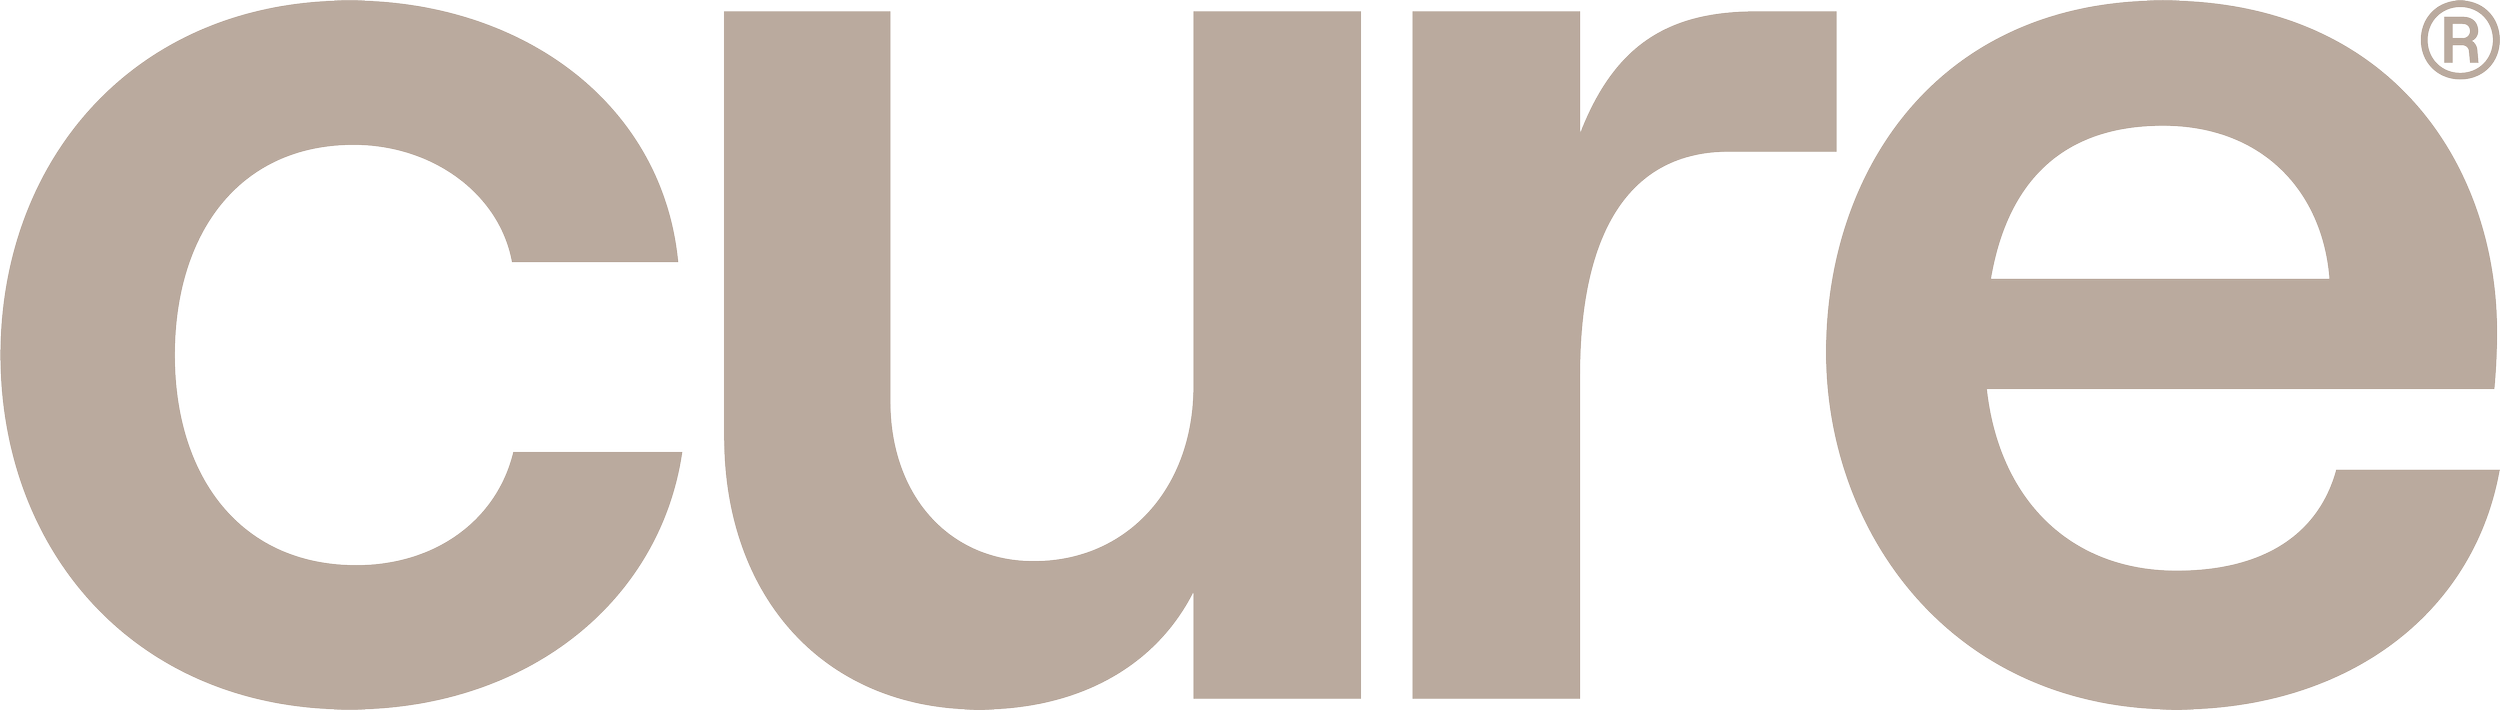 CURE_LOGO_GRAY.png